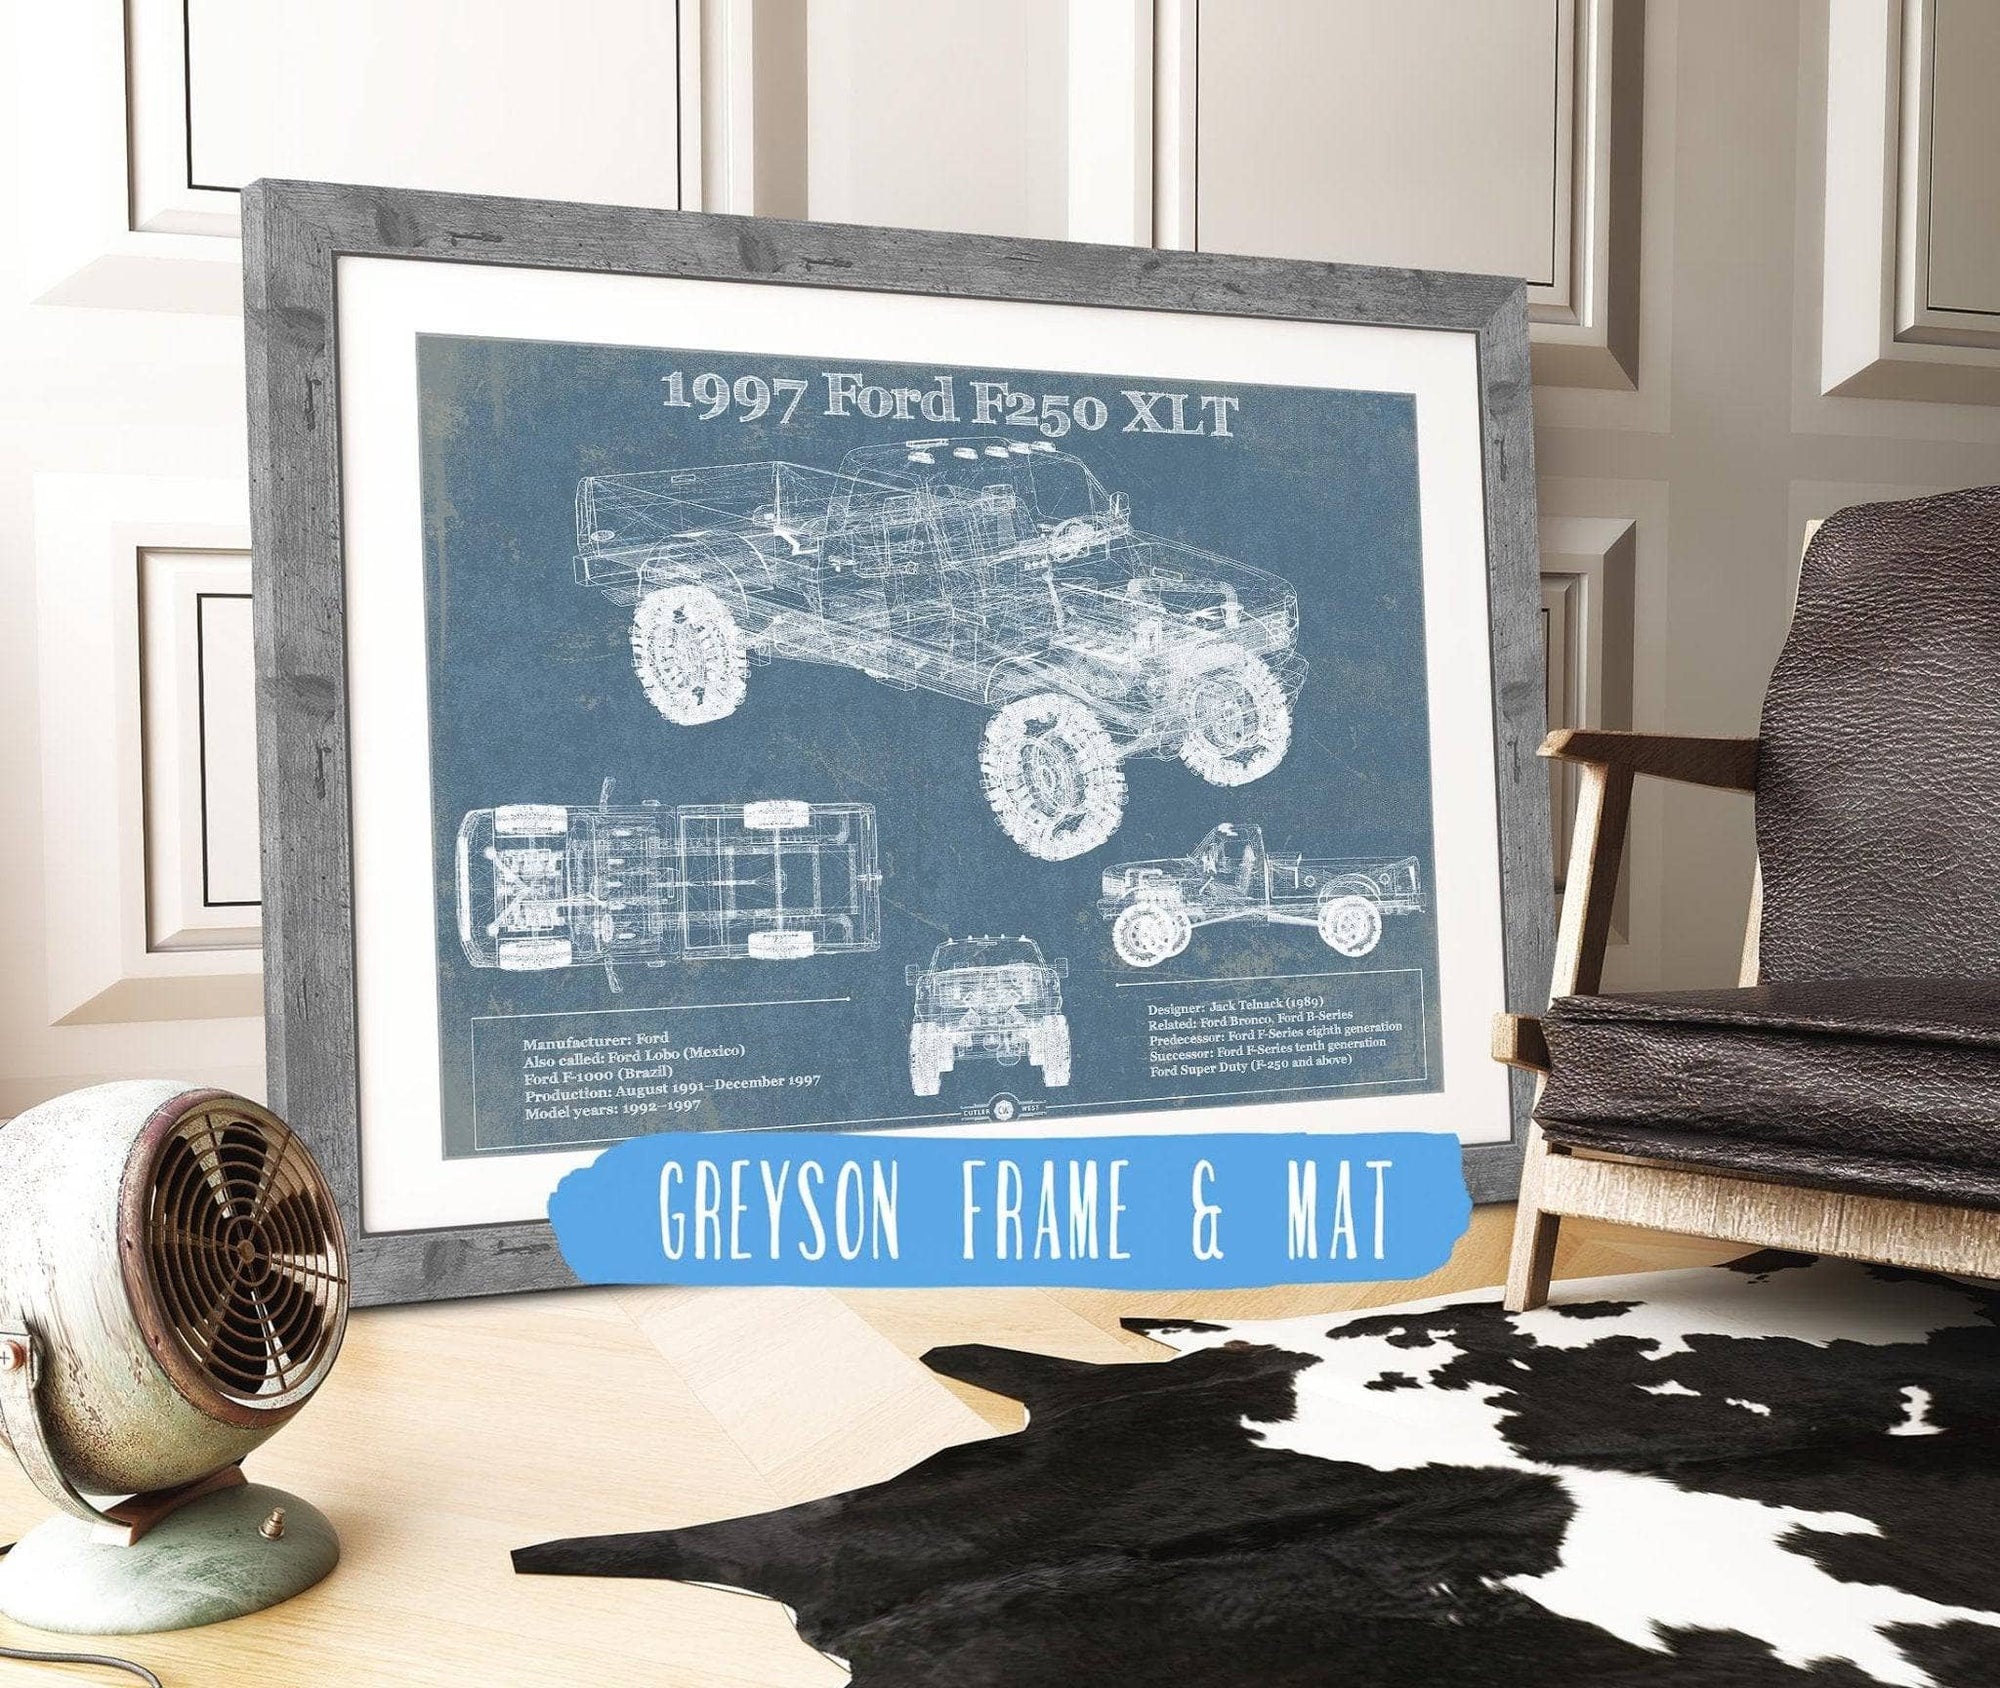 Cutler West Ford Collection 14" x 11" / Greyson Frame & Mat 1997 Ford F250 XLT Vintage Blueprint Auto Print 933311047_39439